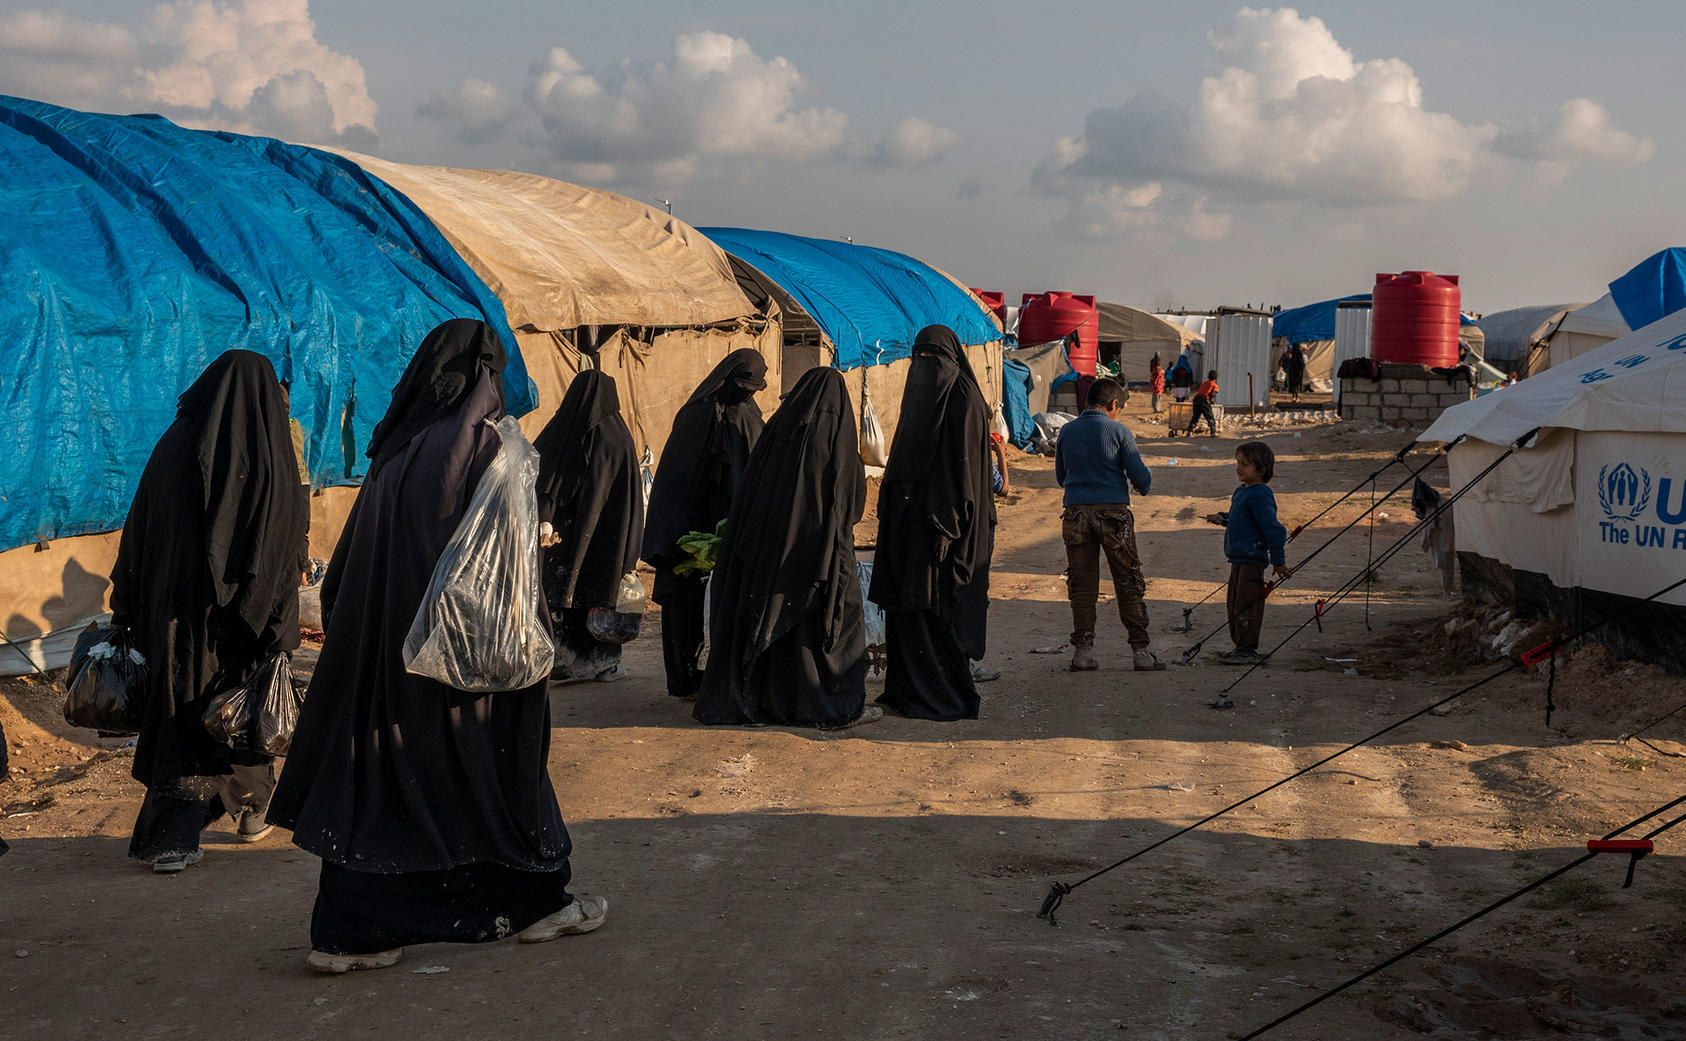 The al-Hol camp in northeast Syria, March 28, 2019. (Ivor Prickett/The New York Times)